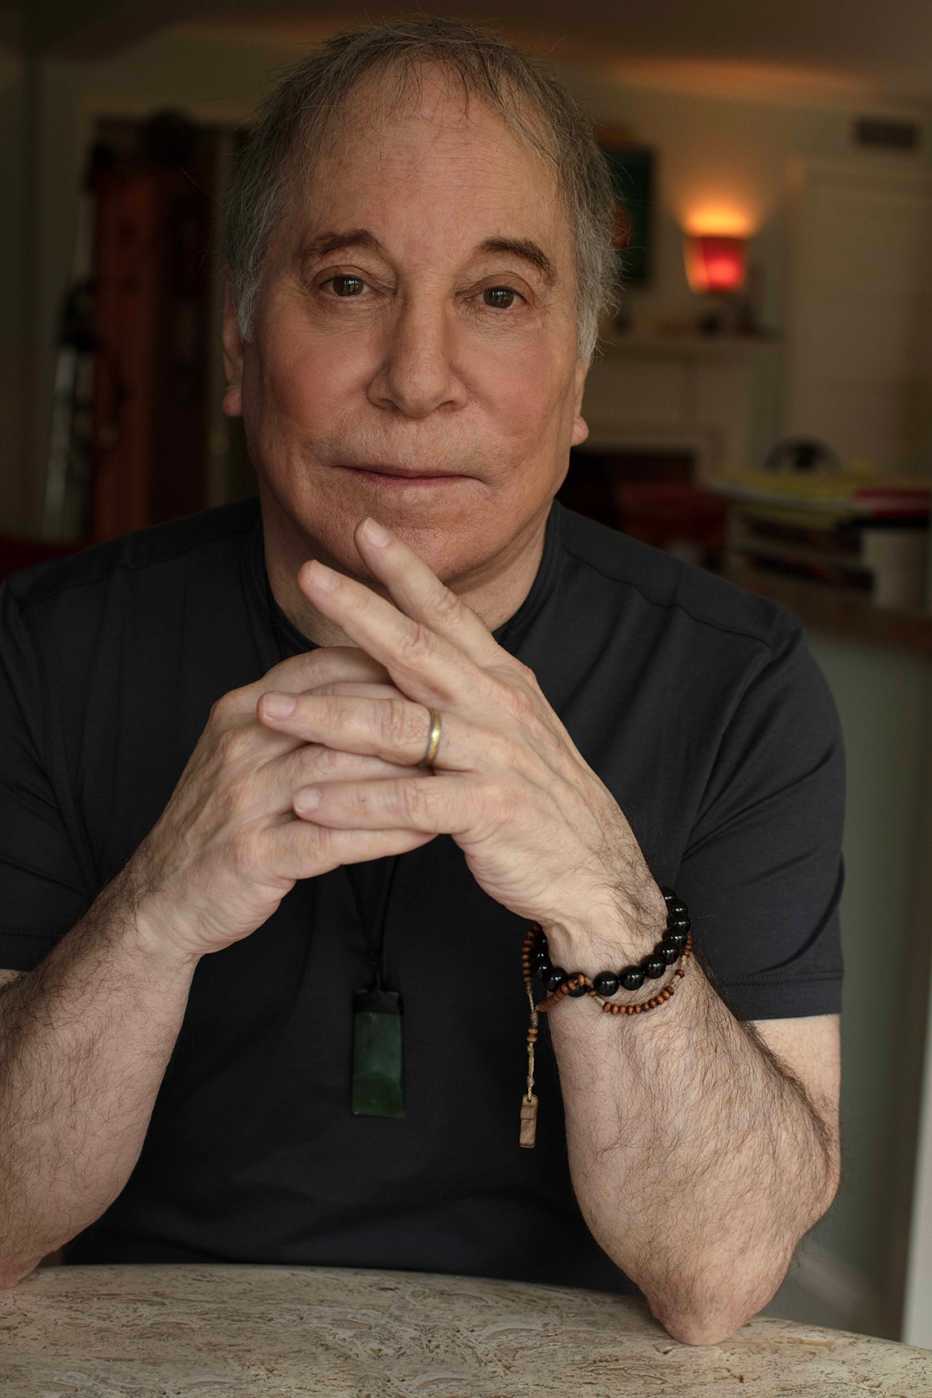 Musician Paul Simon sitting at a table with his hands clasped